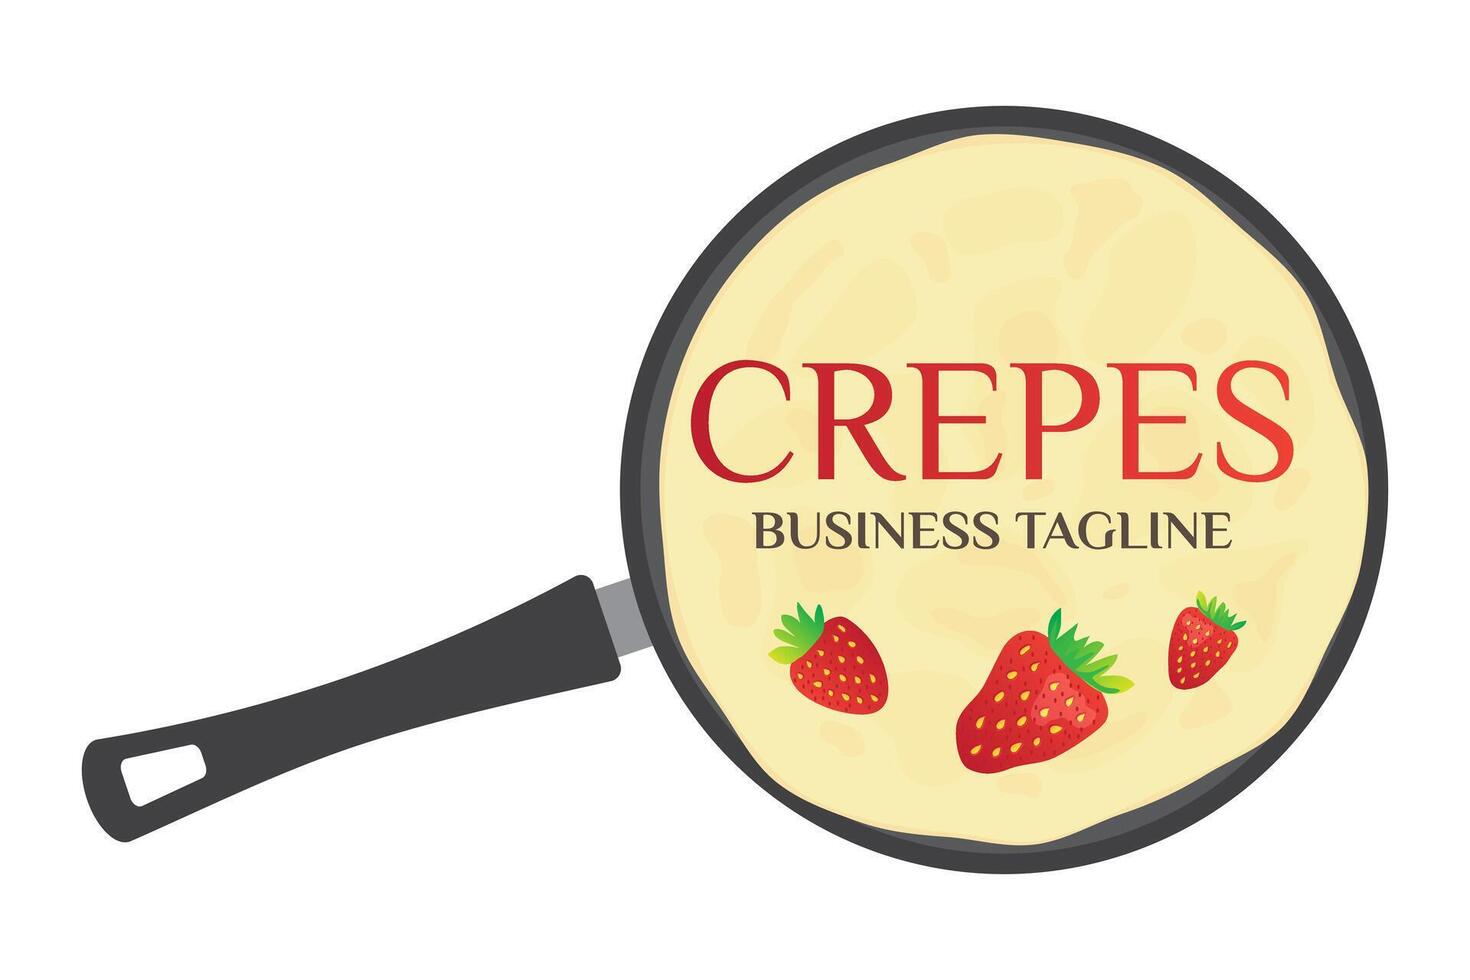 Crepes or Pancakes in Crepe Pan Logo vector